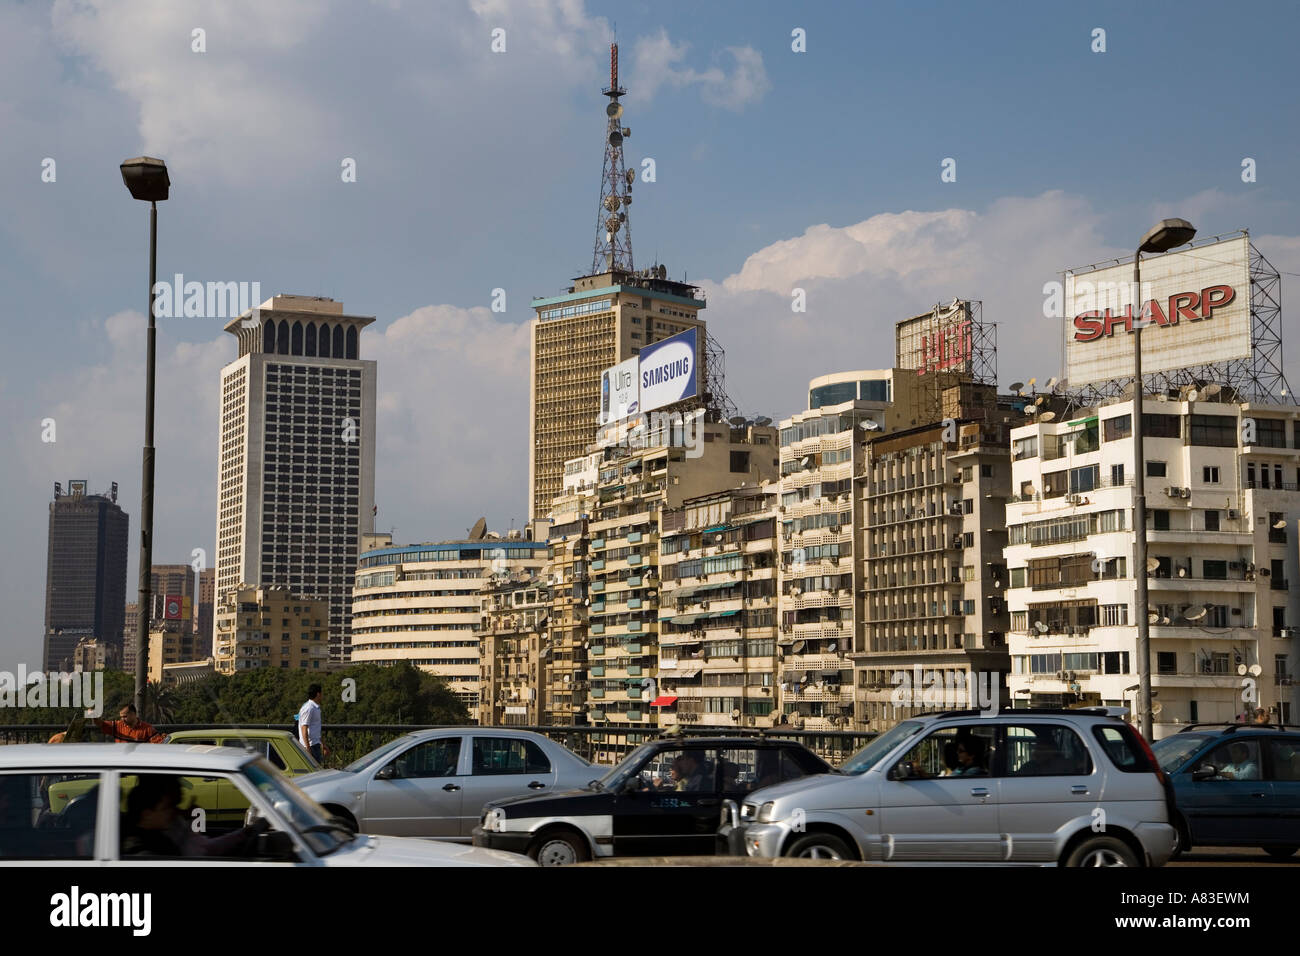 Traffic in downtown Cairo Stock Photo